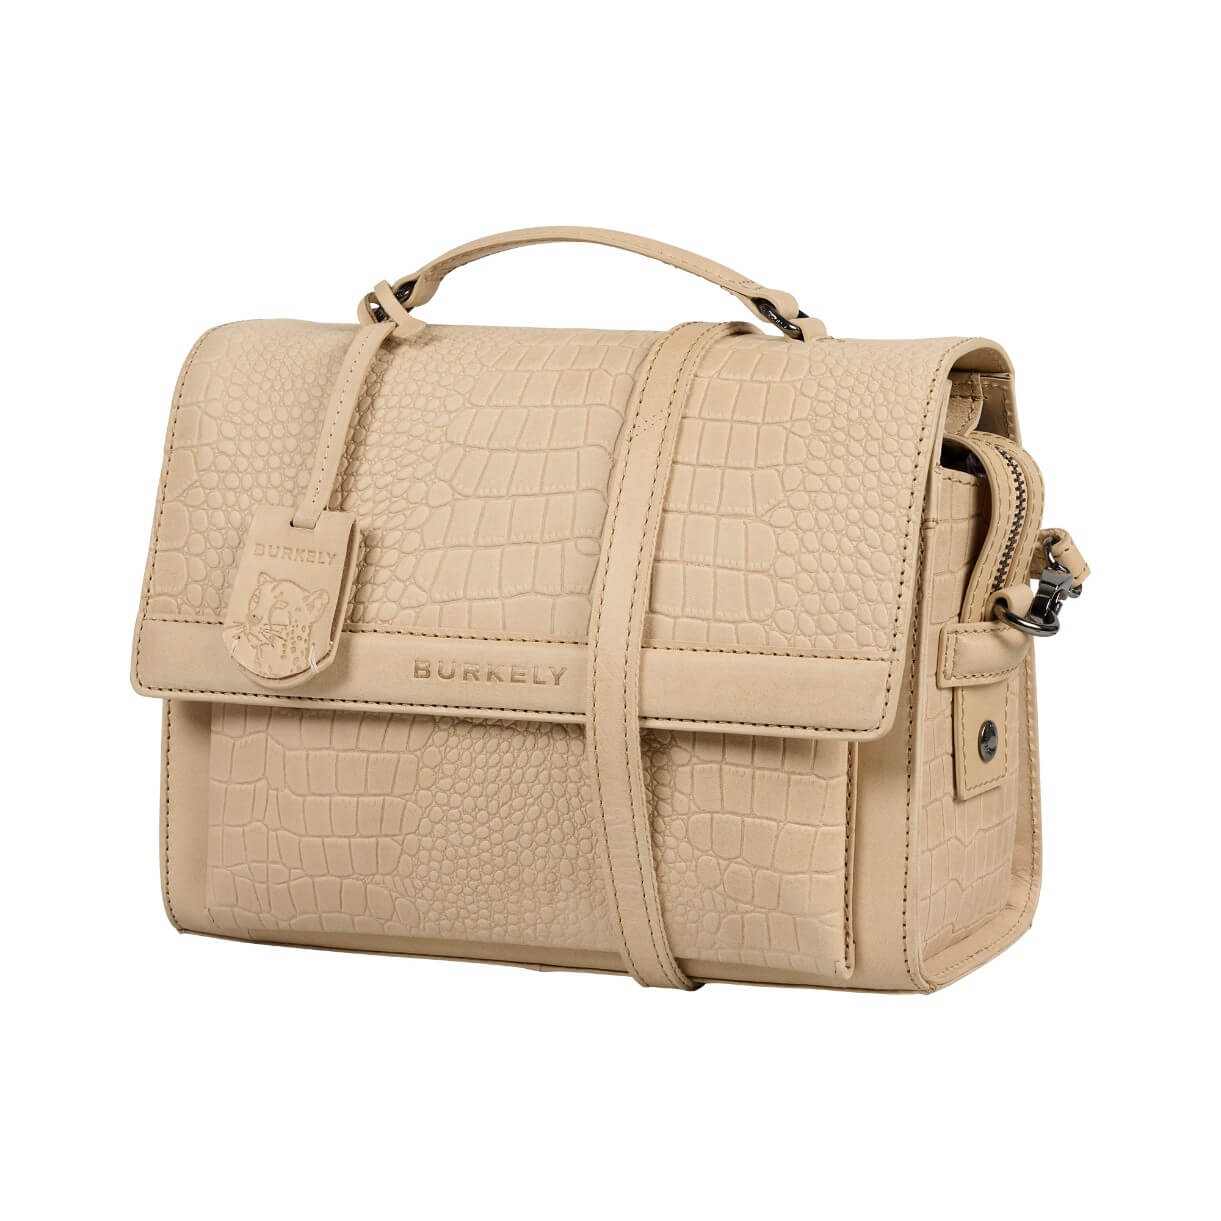 BURKELY CASUAL CARLY CITYBAG